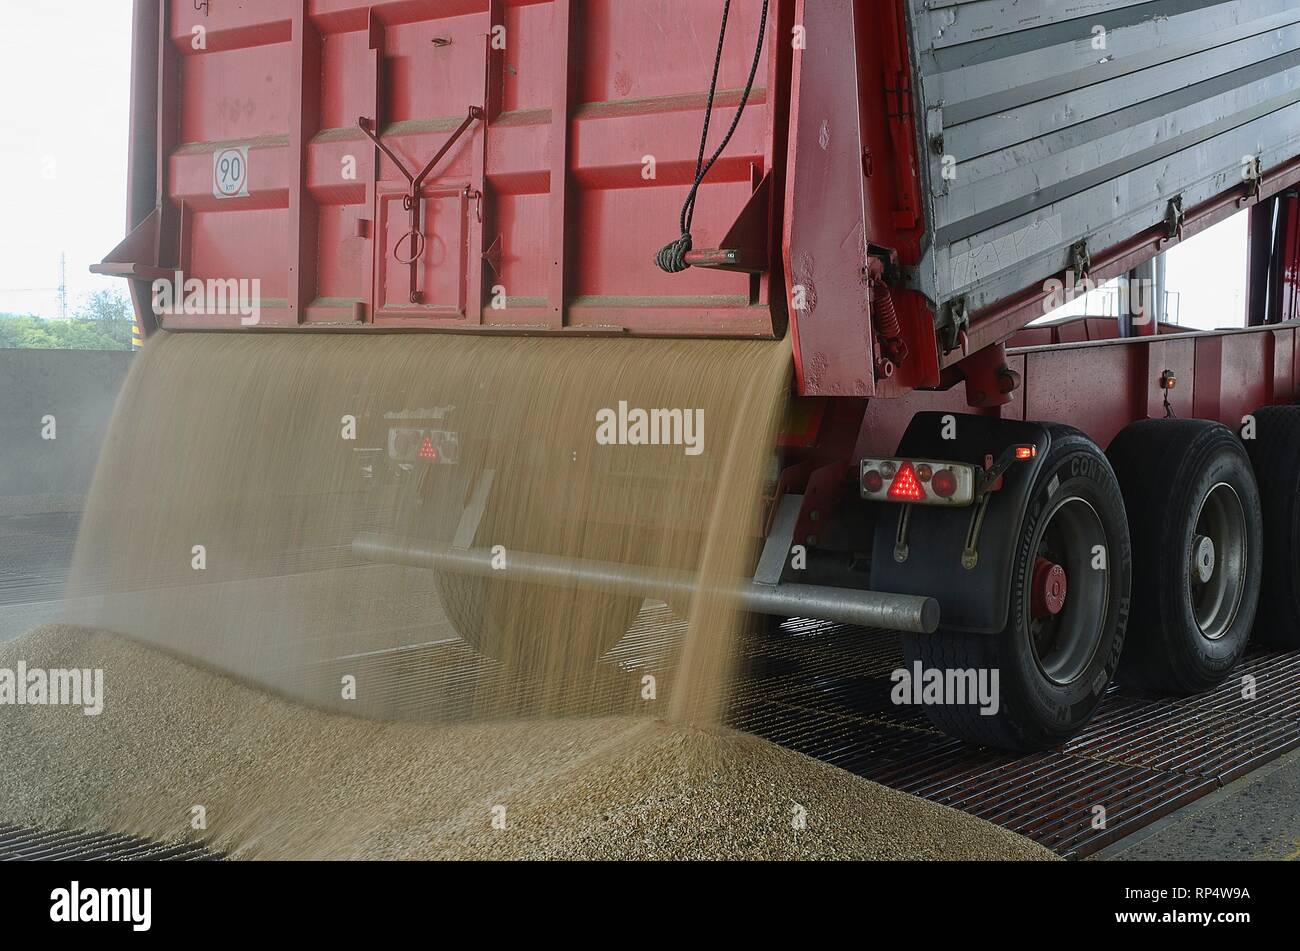 Just harvested corn inside a trailer. Grain poured from trailer into a silo for processing Stock Photo